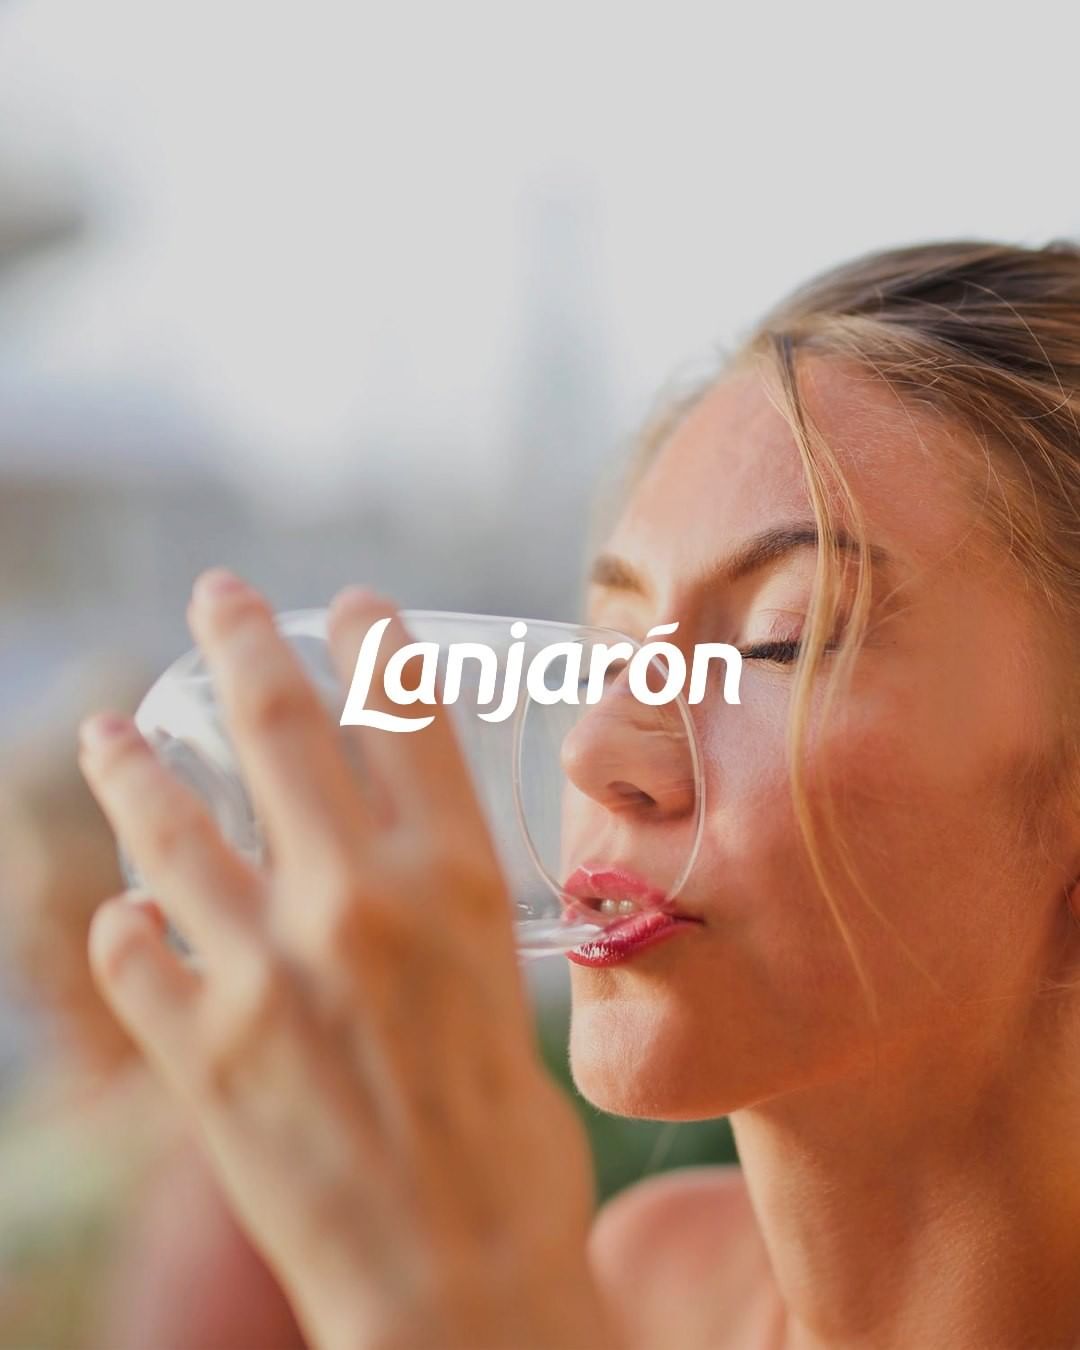 Very important to keep drinking water constantly throughout the day at these times.... Try Lanjarón natural mineral water and feel how smooth it wets your throat